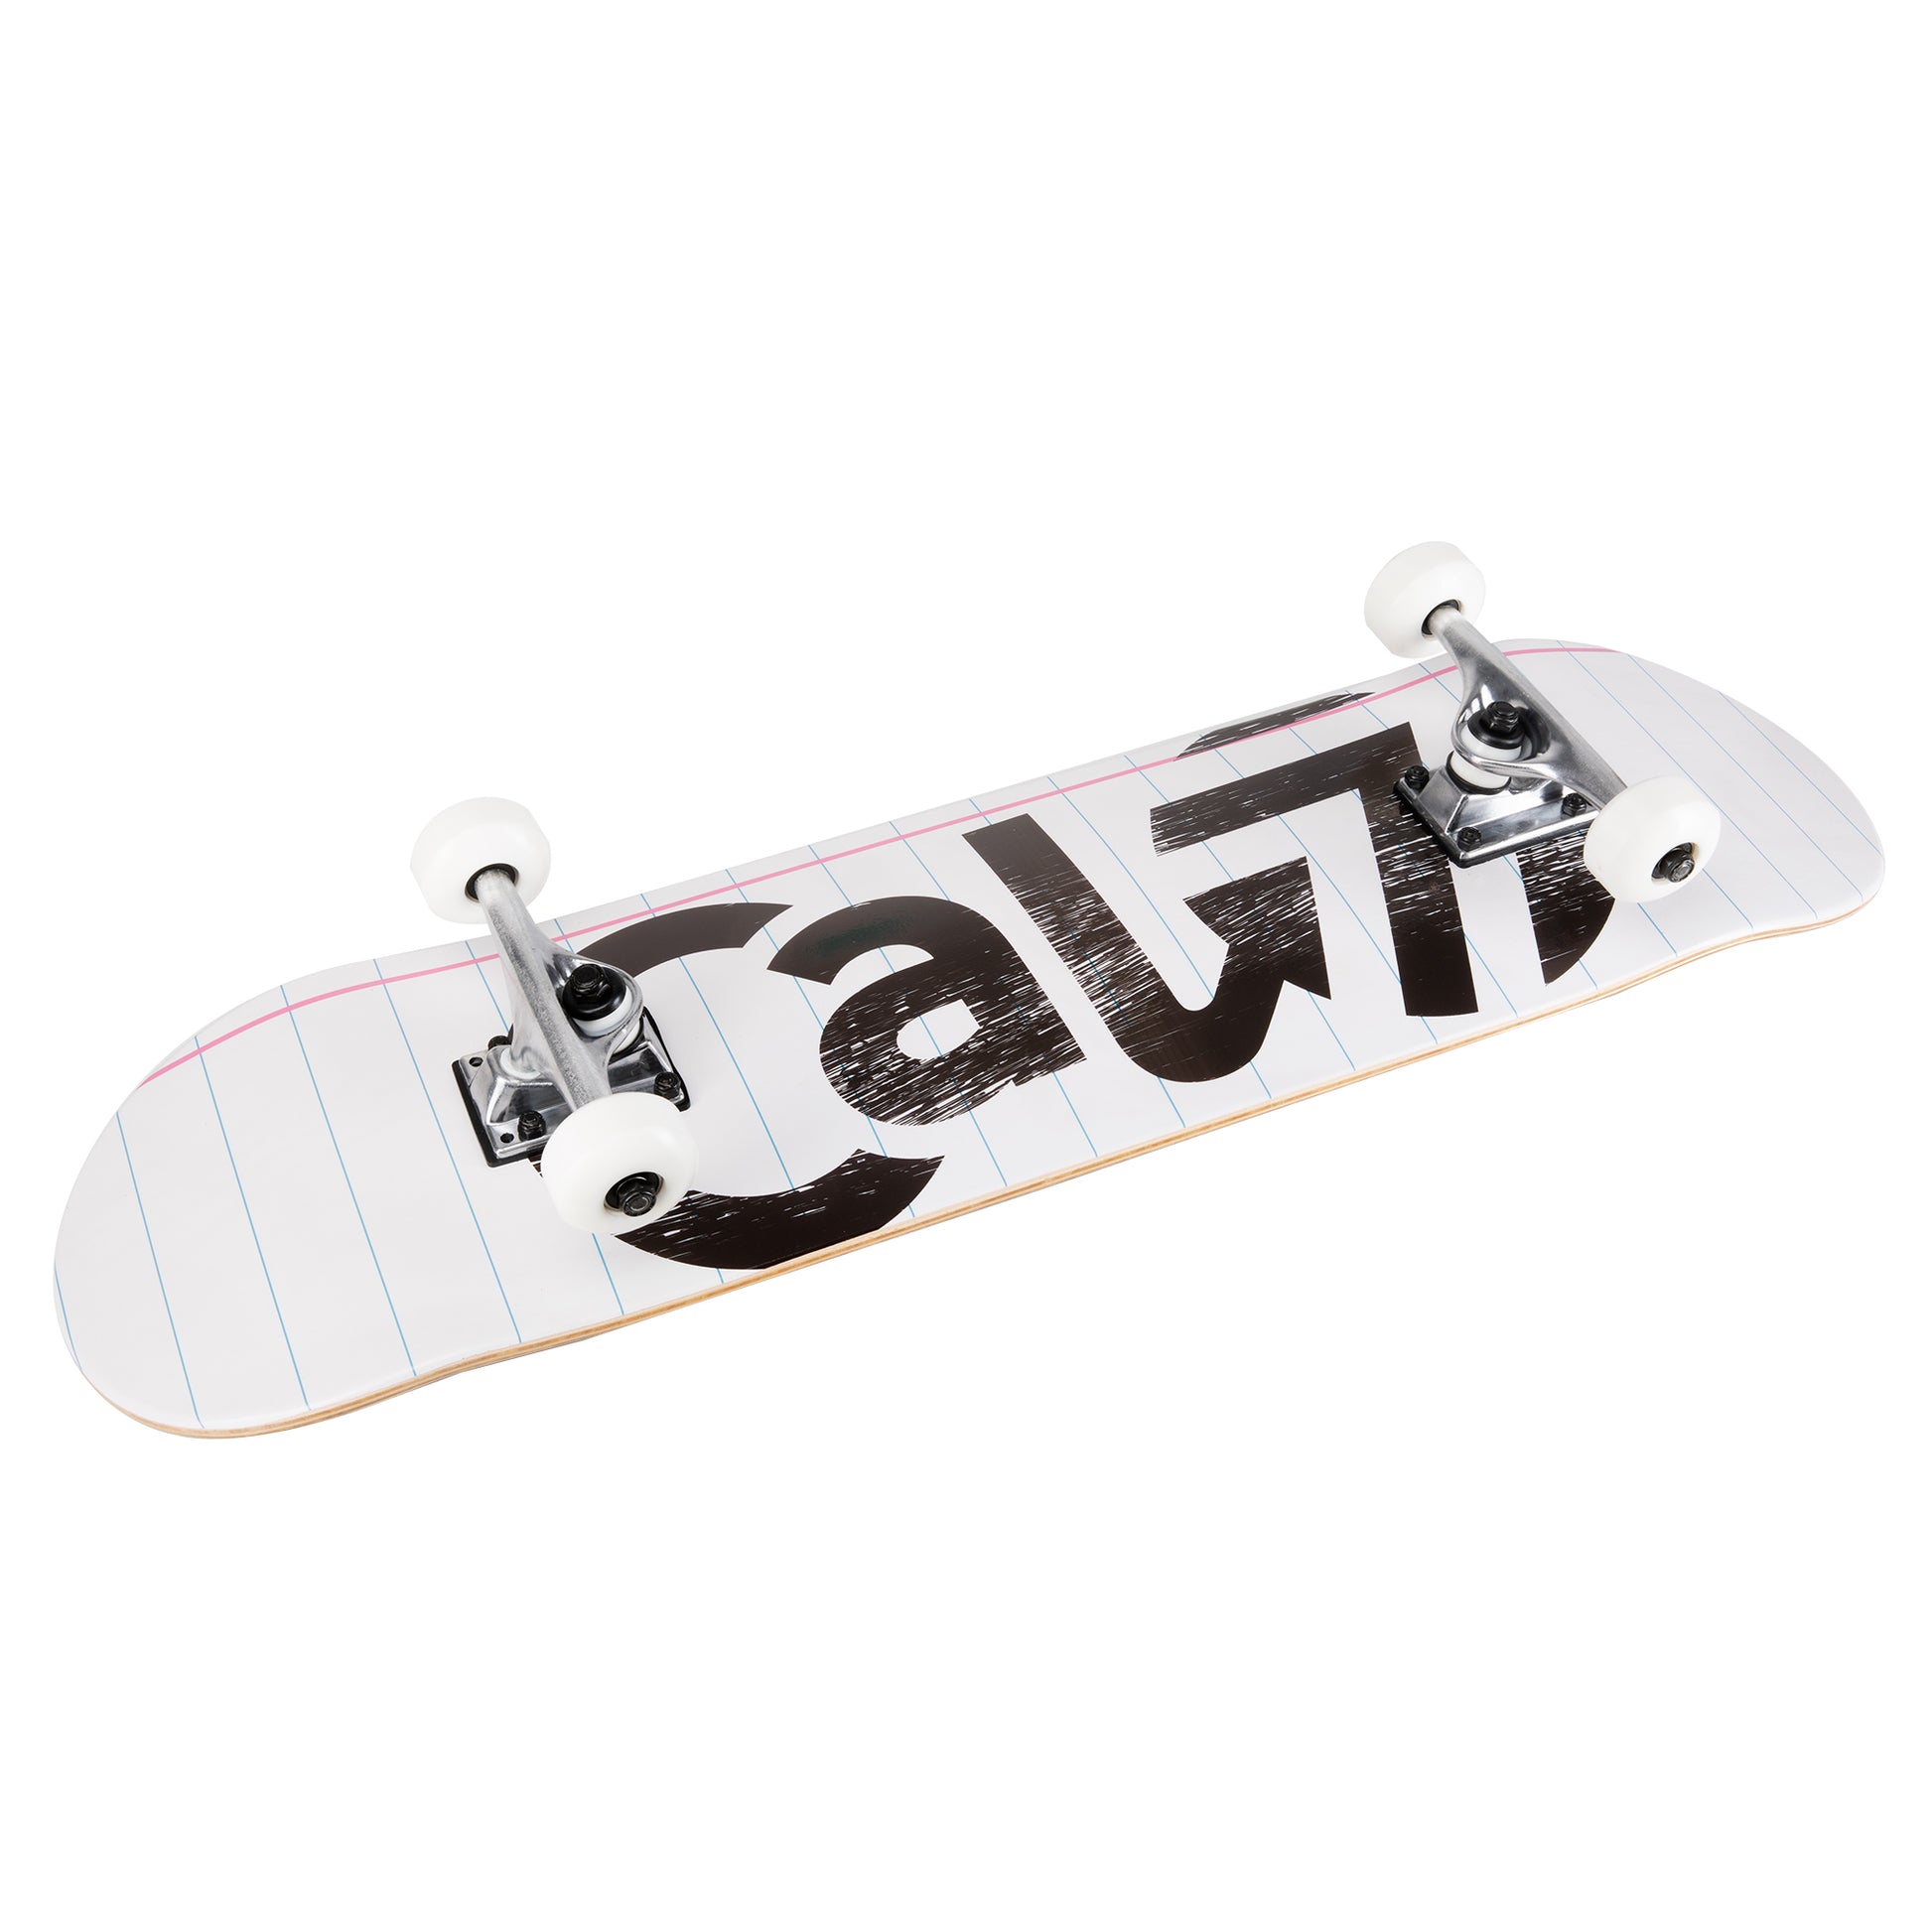 Cal 7 complete 8-inch Dropout skateboard with notebook graphic